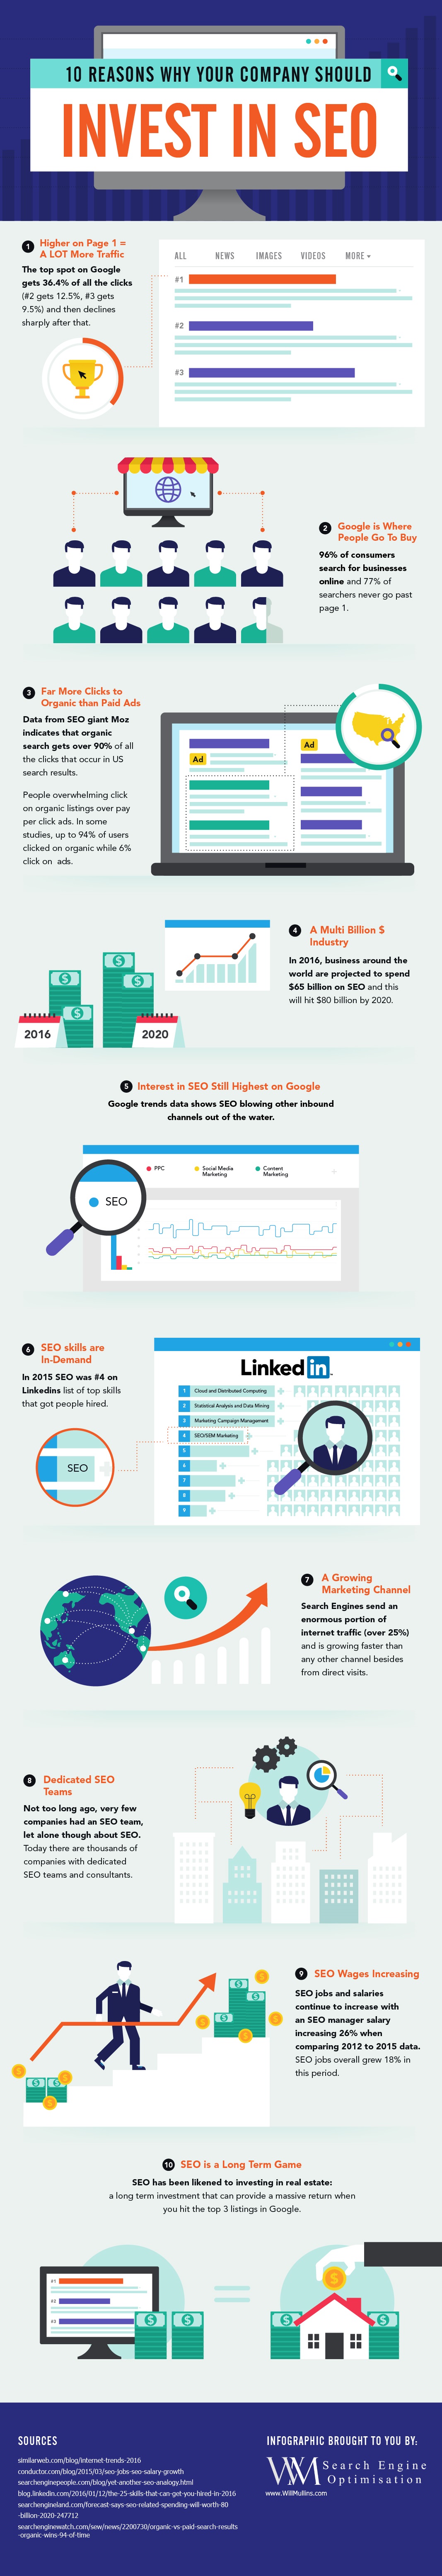 Infographic for 10 Reasons Why Your Company Should Invest In SEO